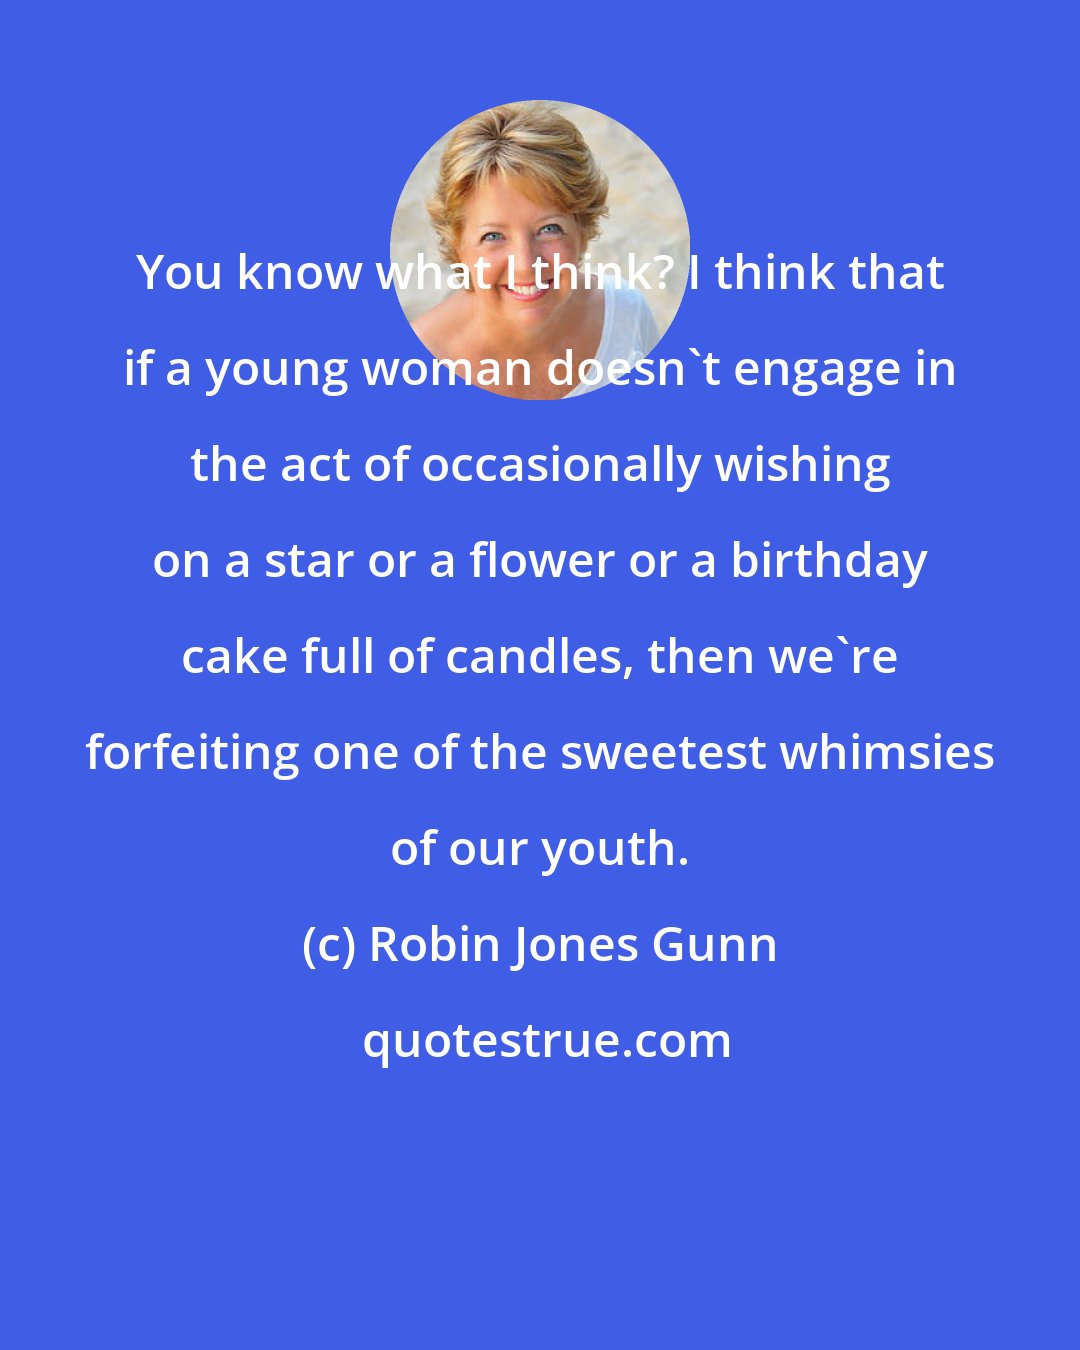 Robin Jones Gunn: You know what I think? I think that if a young woman doesn't engage in the act of occasionally wishing on a star or a flower or a birthday cake full of candles, then we're forfeiting one of the sweetest whimsies of our youth.